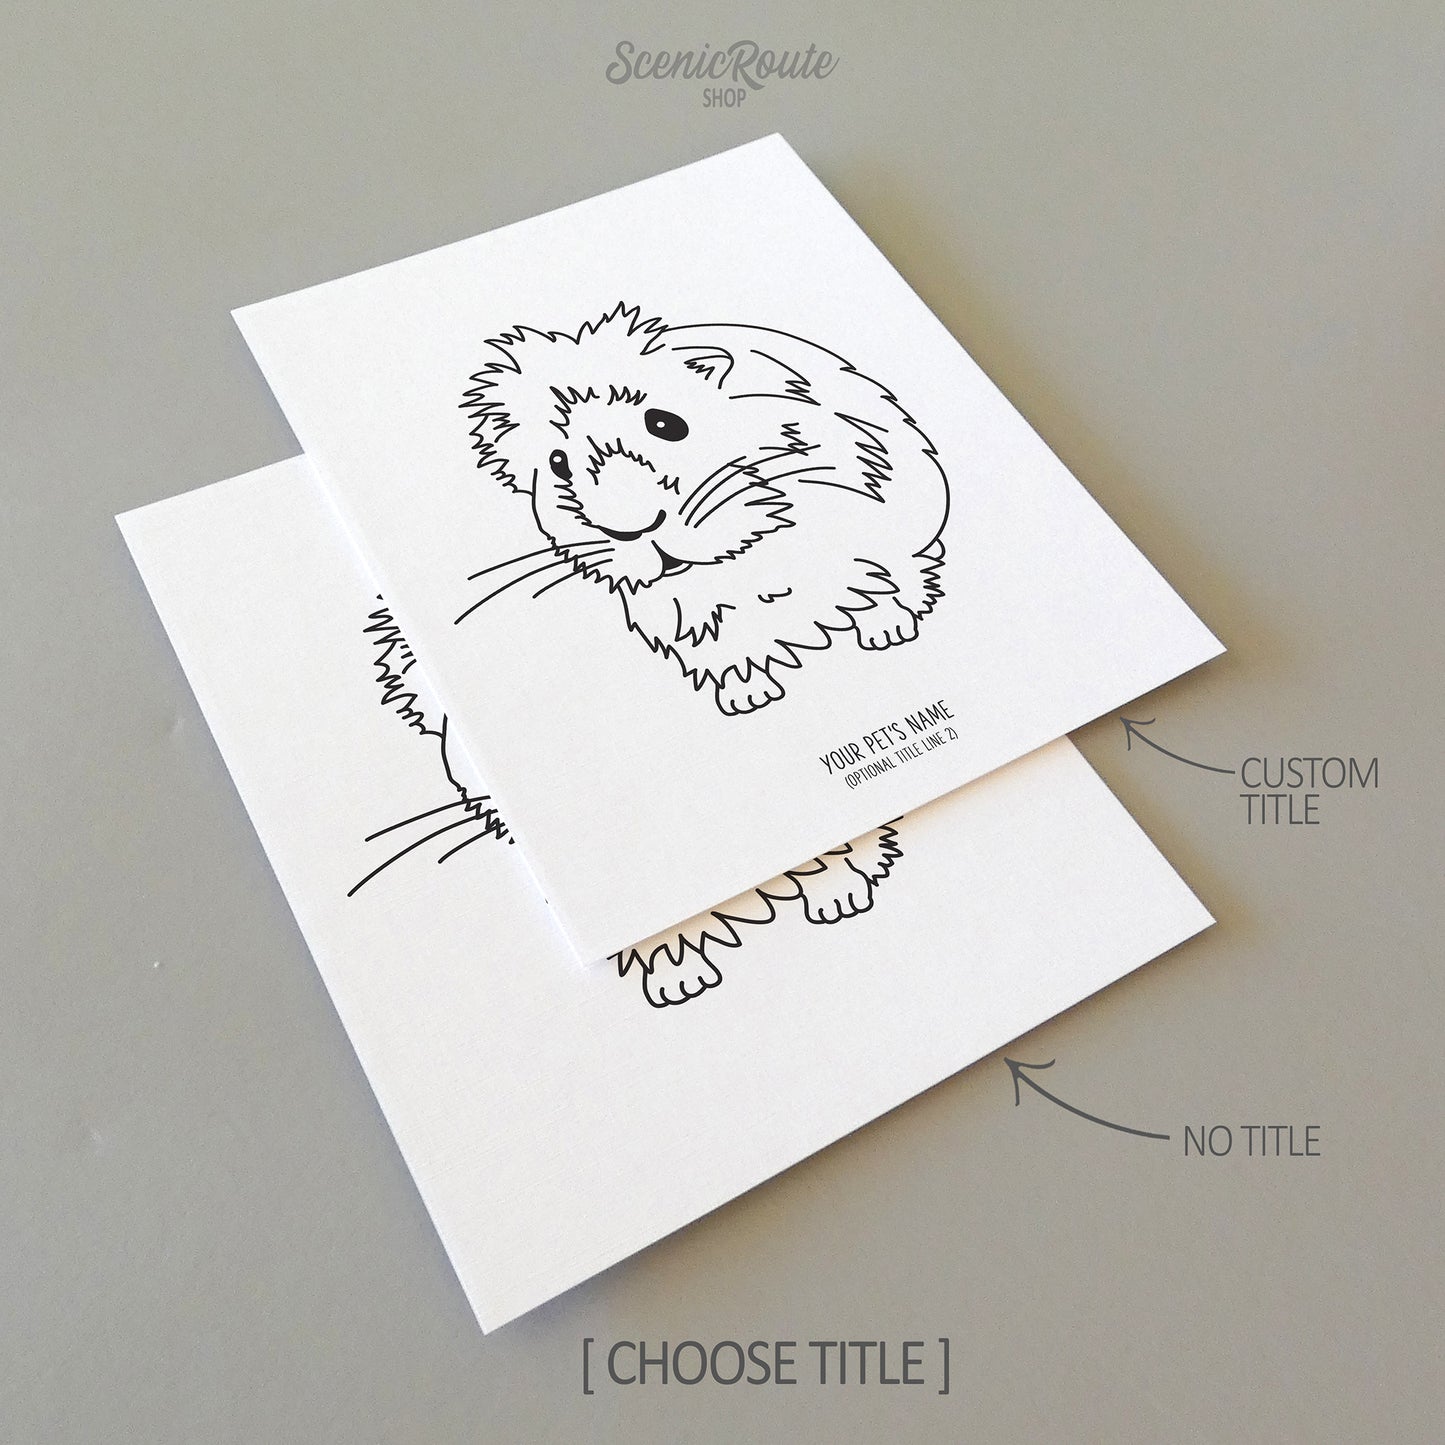 Two line art drawings of a Guinea Pig on white linen paper with a gray background.  The pieces are shown with “No Title” and “Custom Title” options for the available art print options.